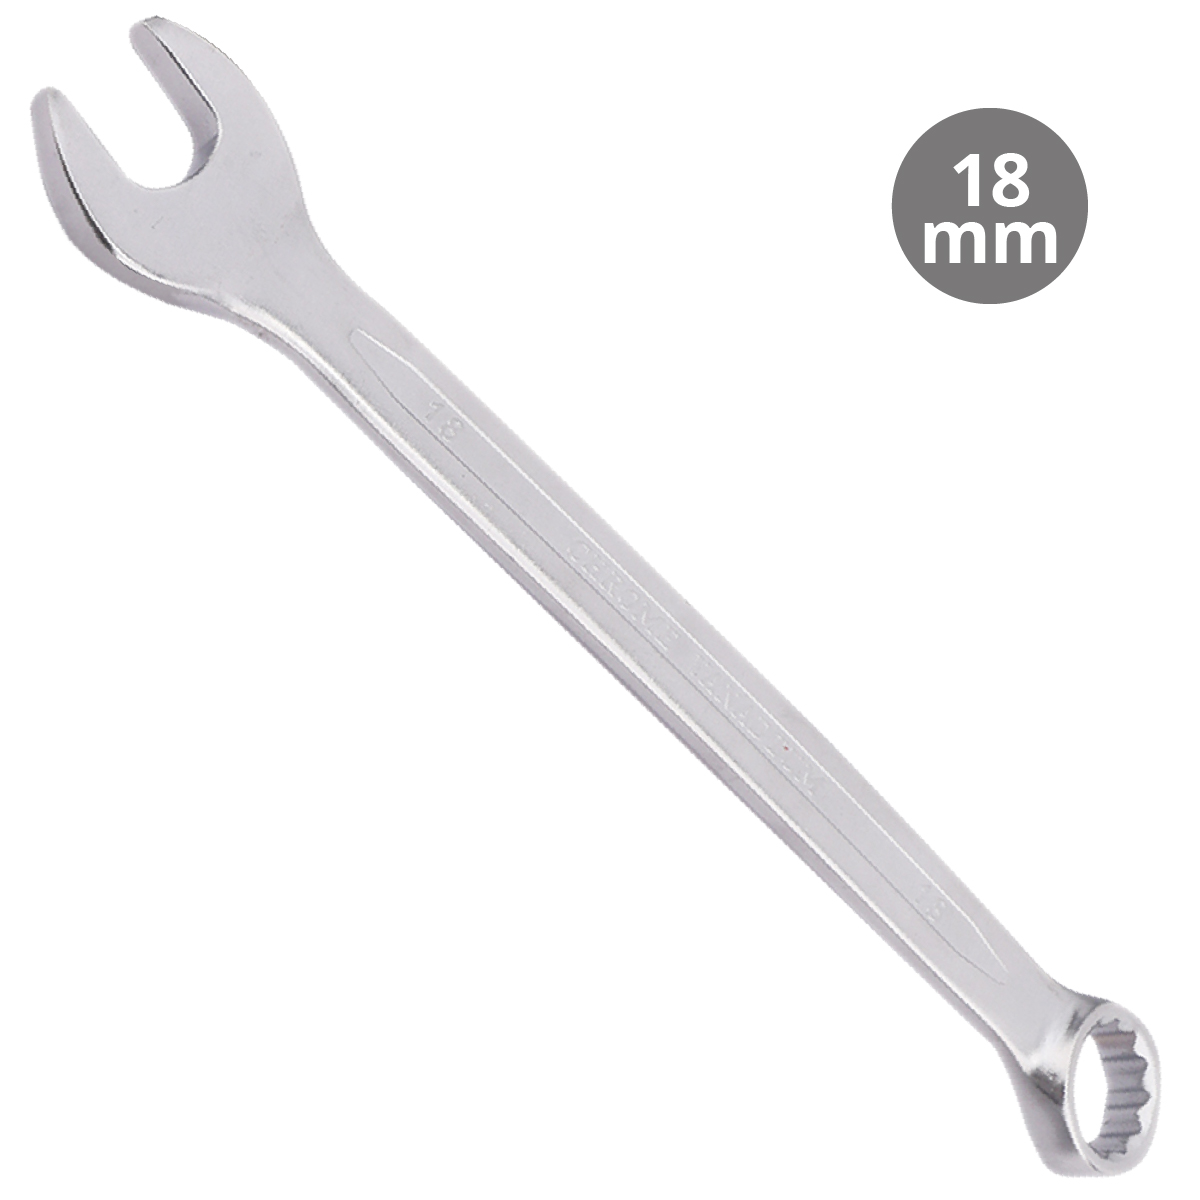 Combination wrench CR-V 18mm